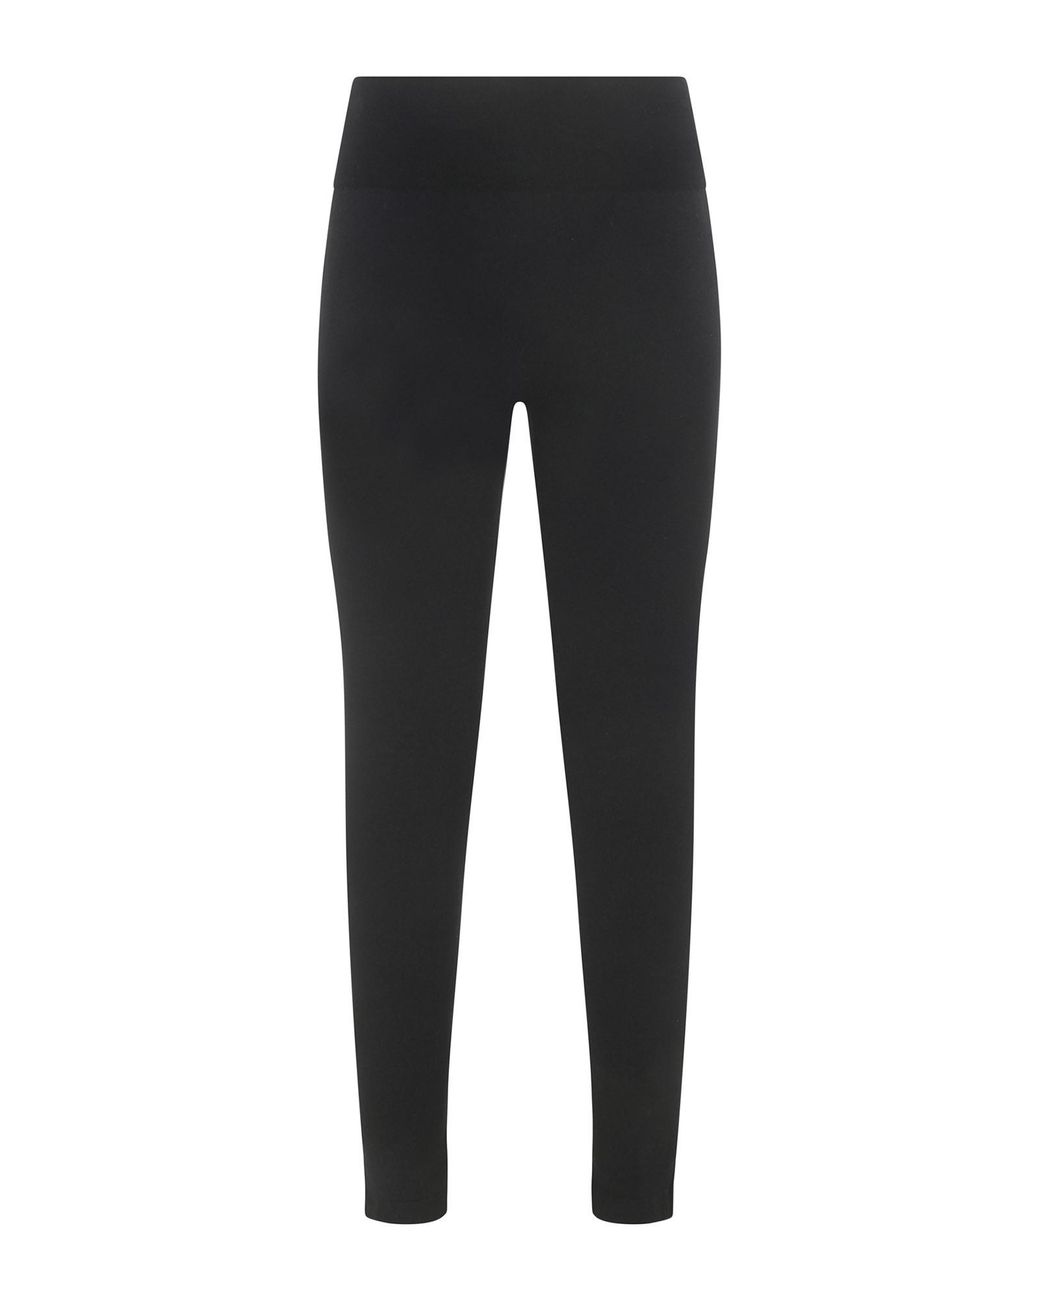 Wolford Perfect Fit Leggings in Black